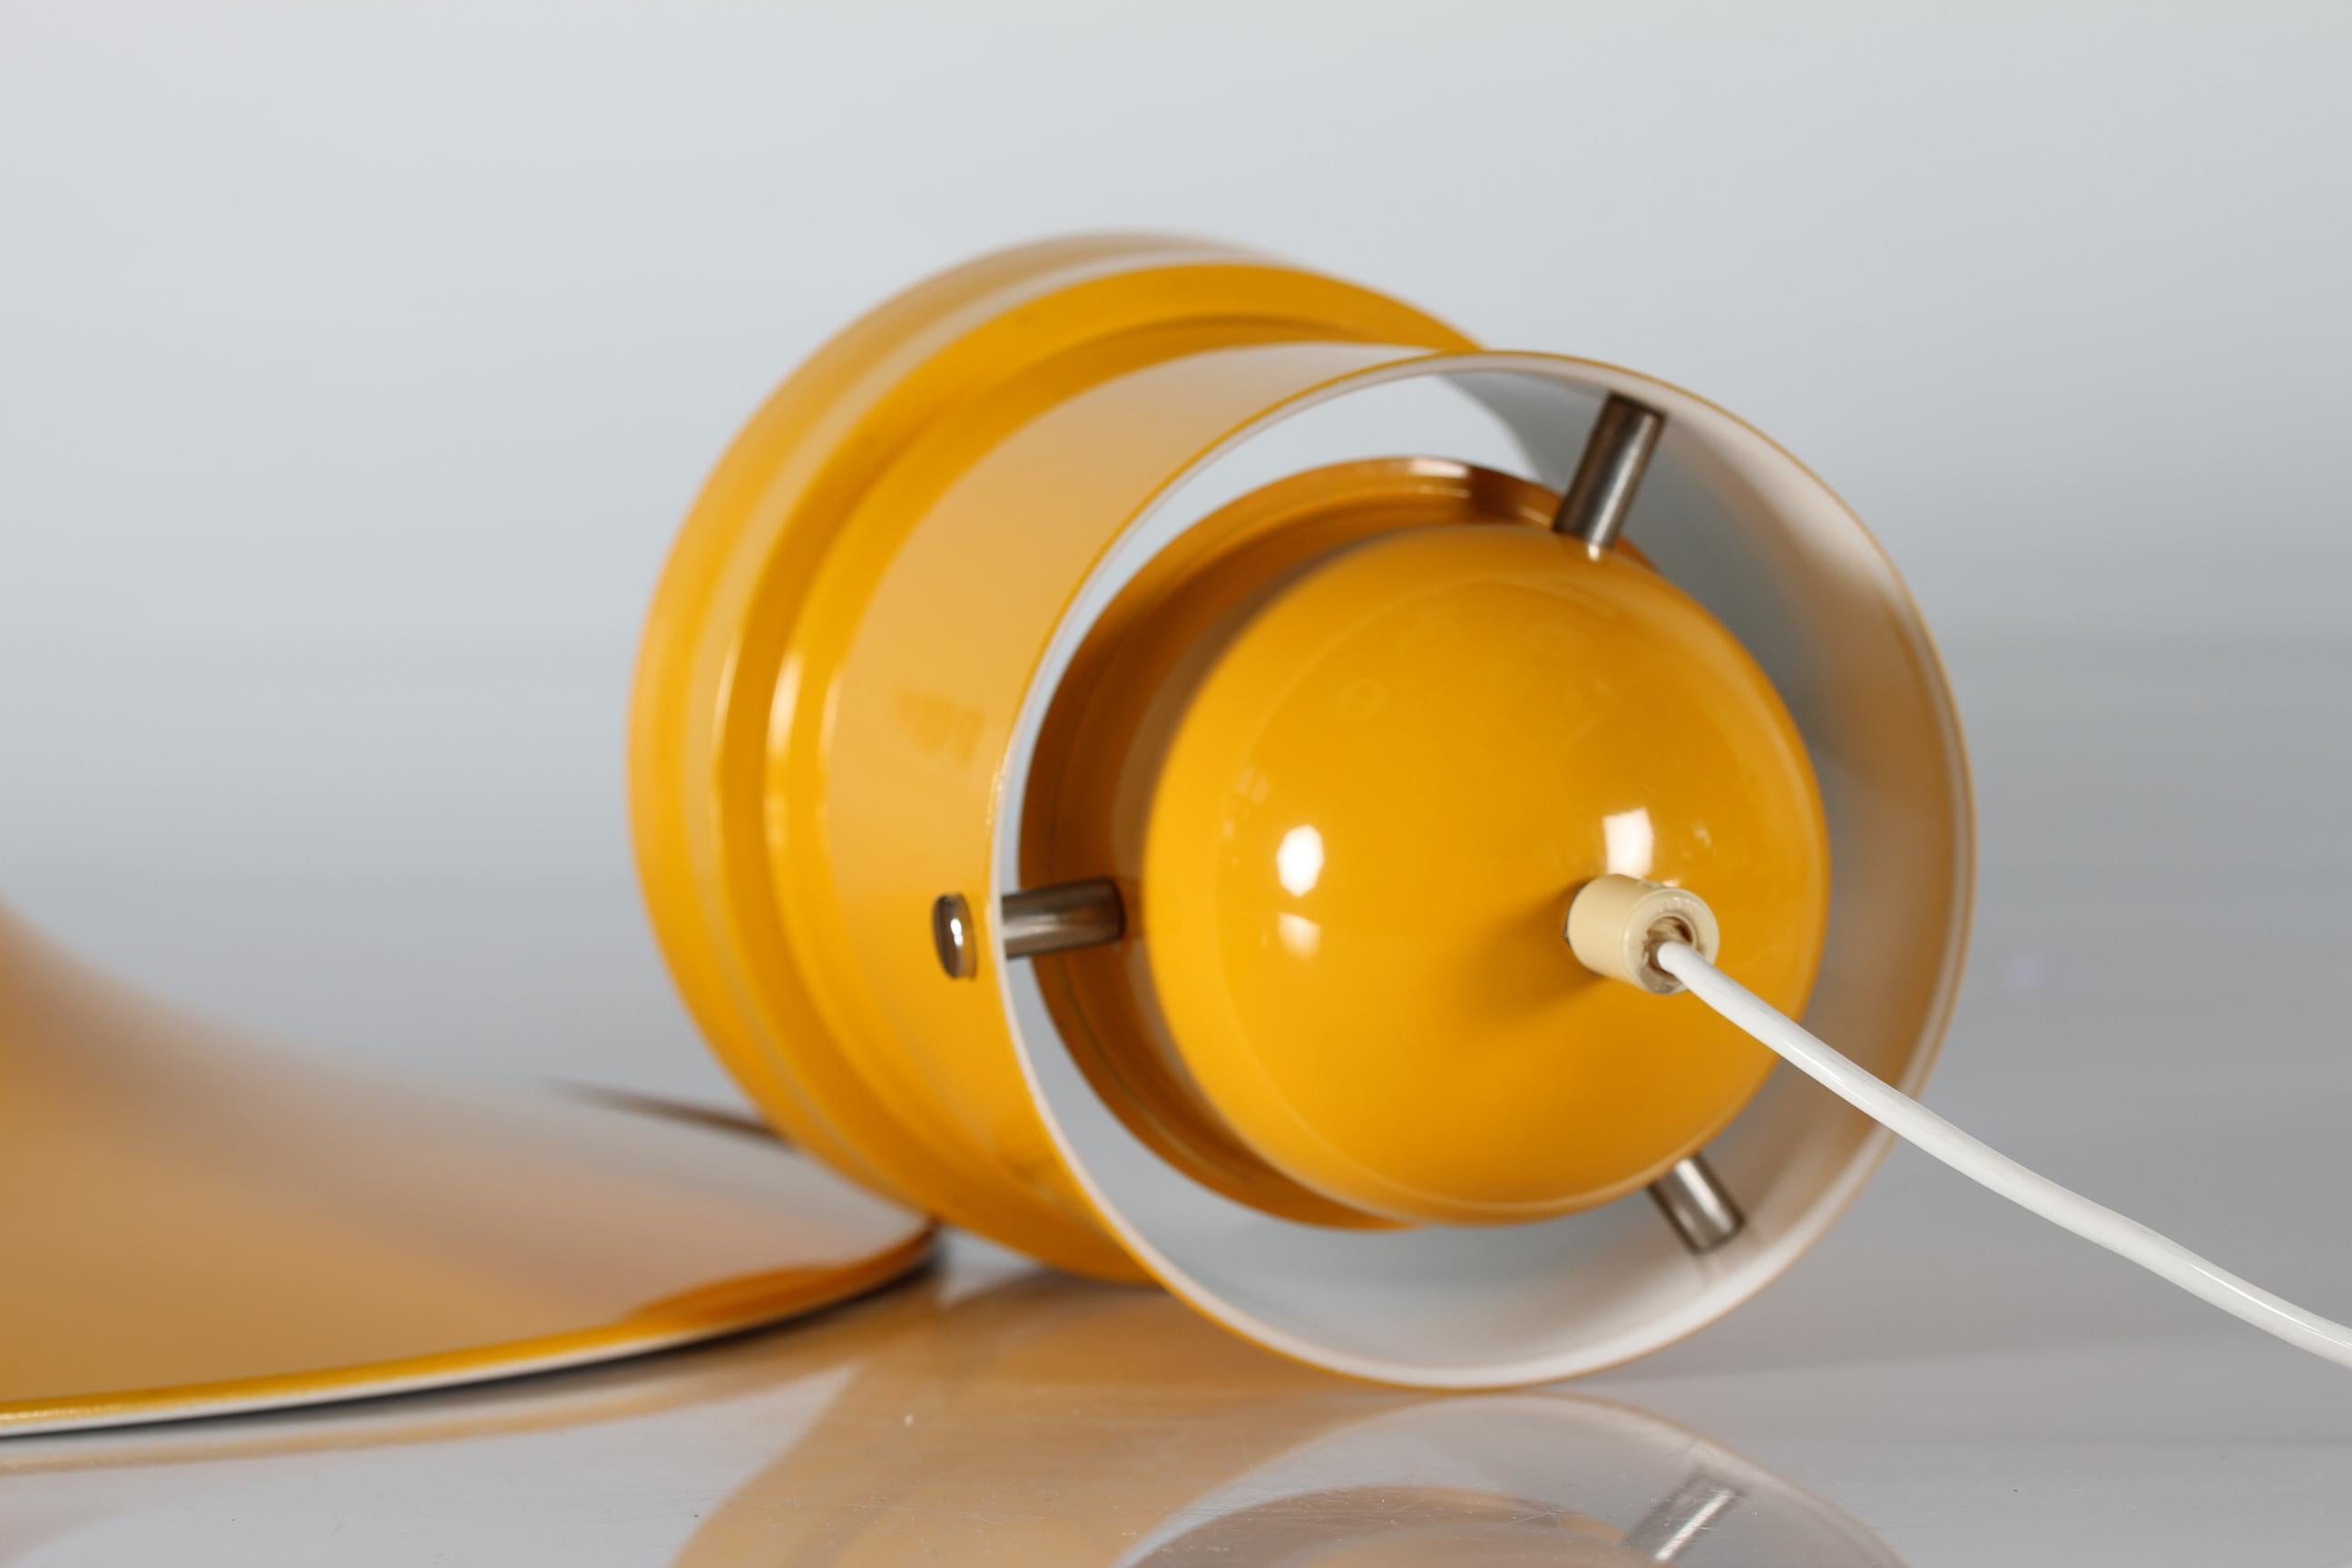 Large Swedish Pendant Light Cyklon by P. O. Ström with Yellow Lacquer, 1970s For Sale 2